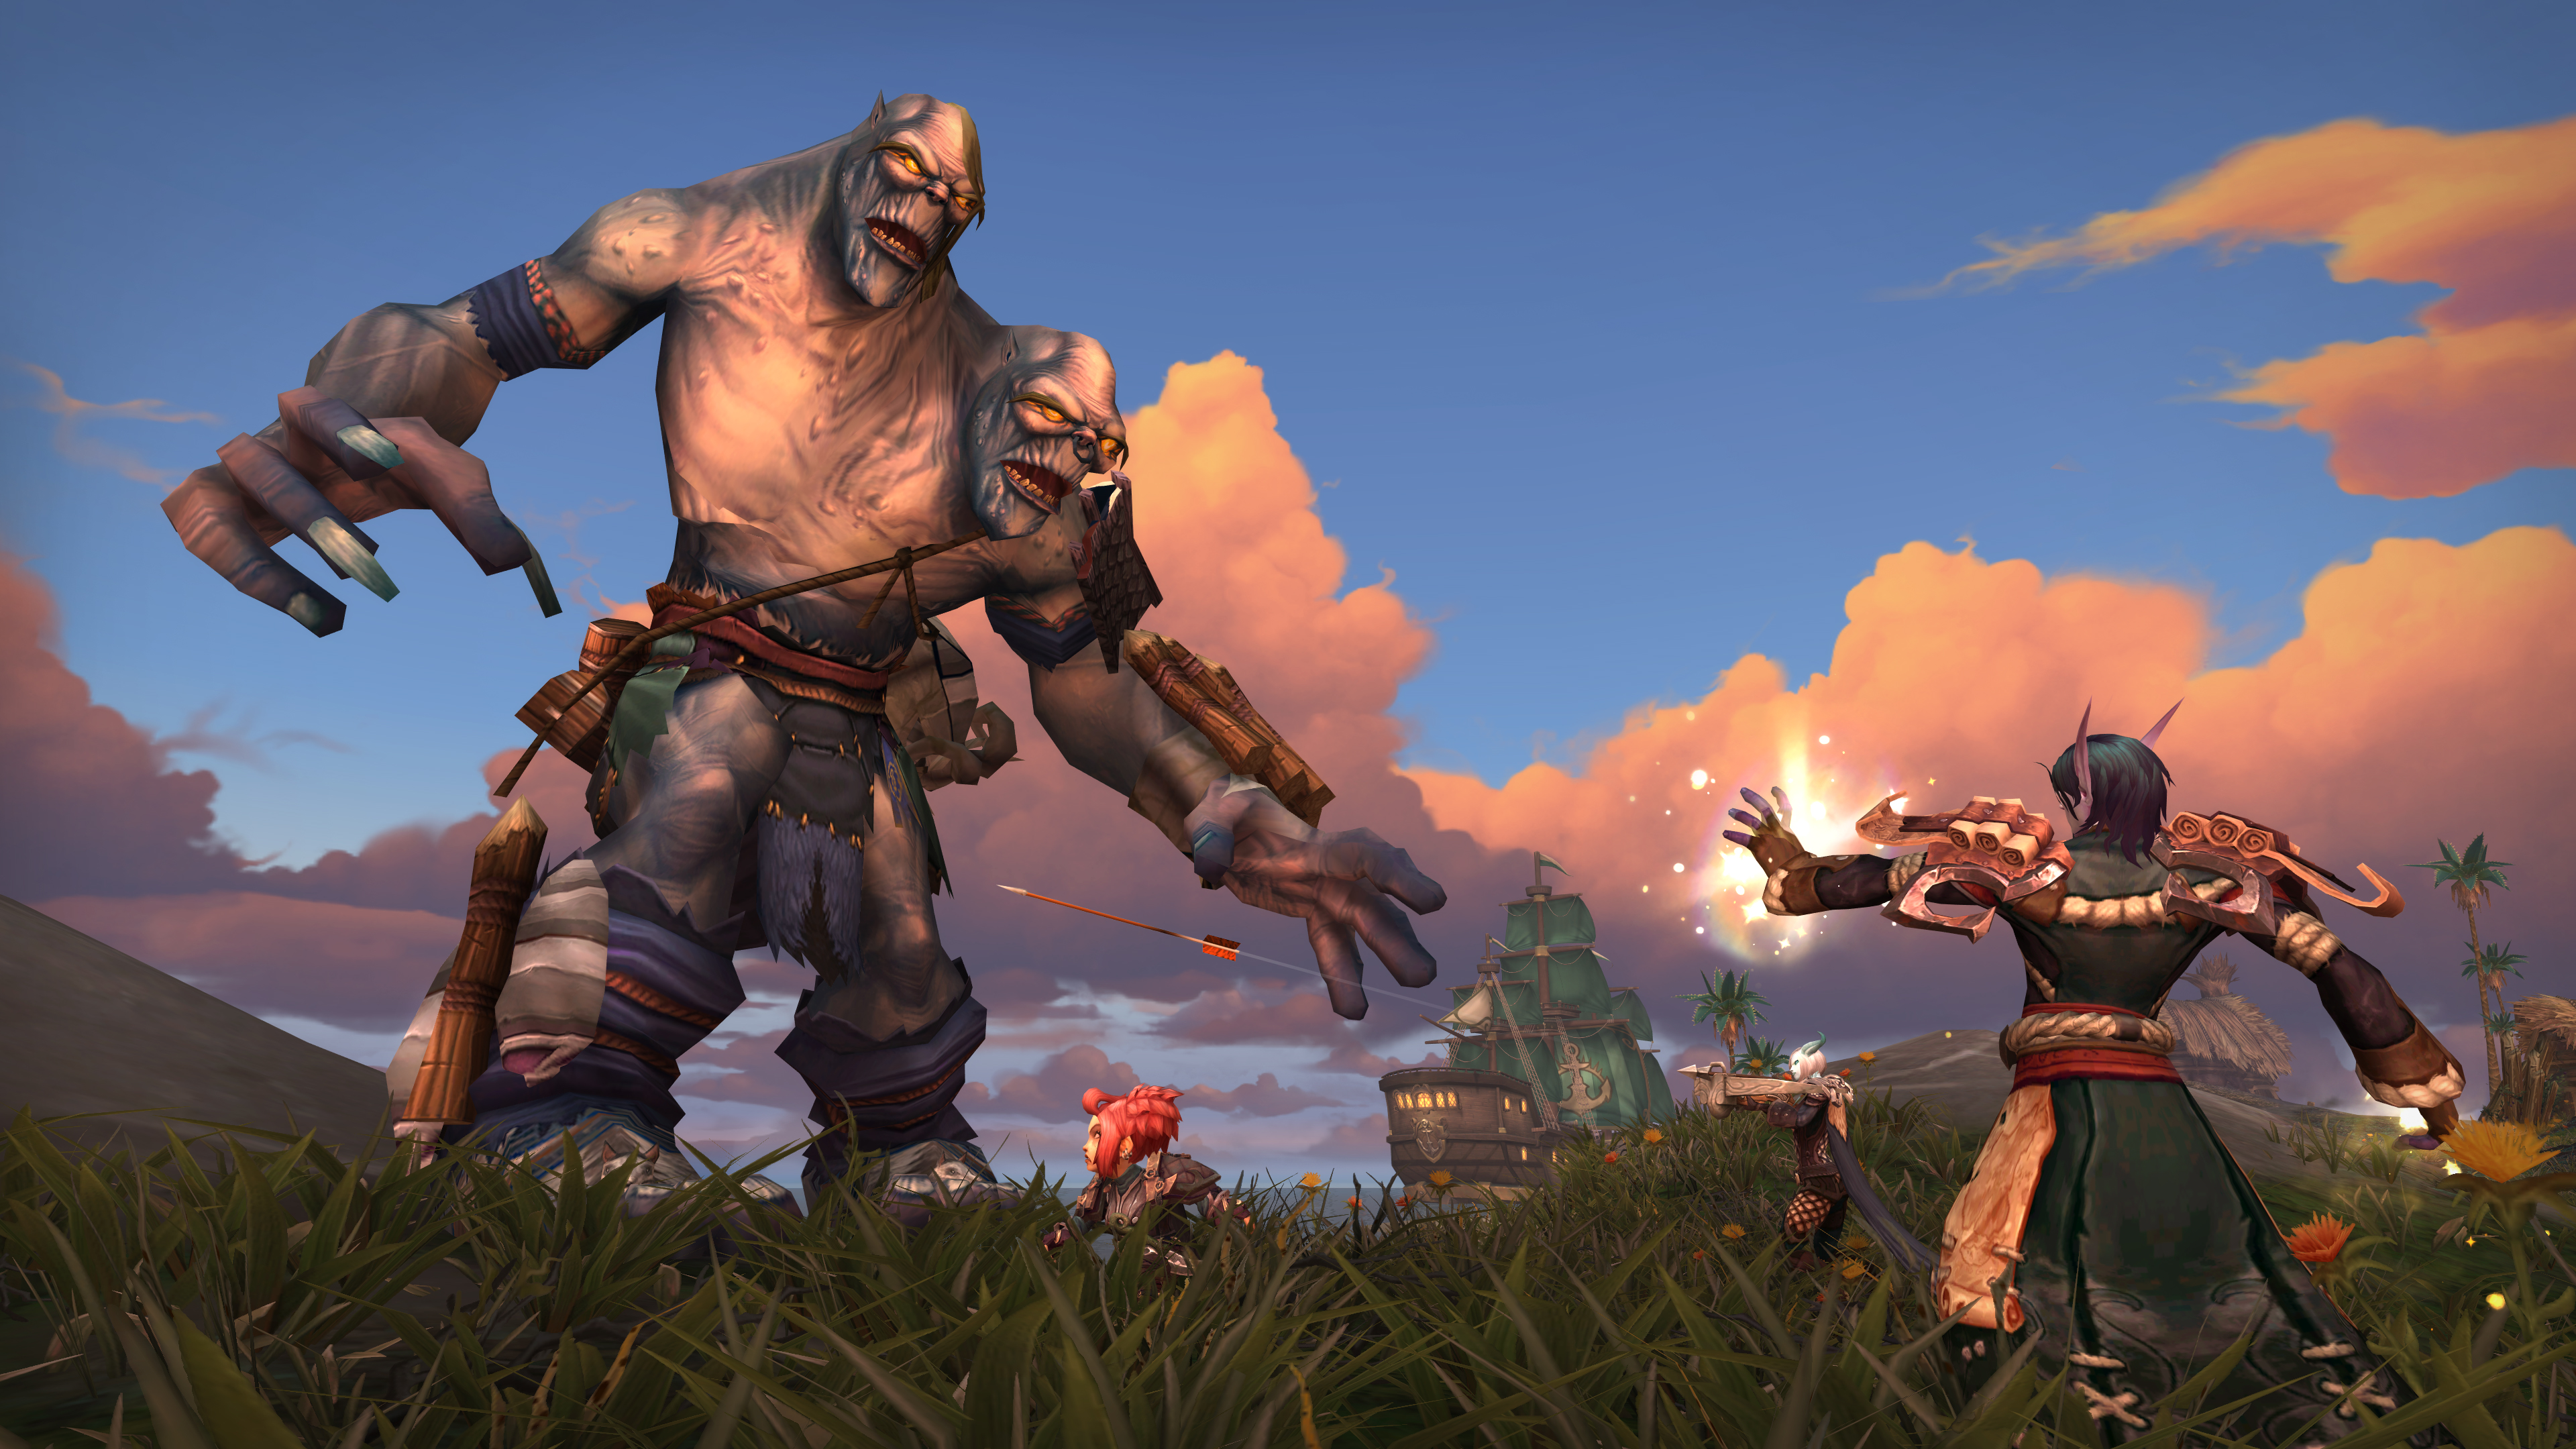 World of Warcraft player fighting two-head ogre